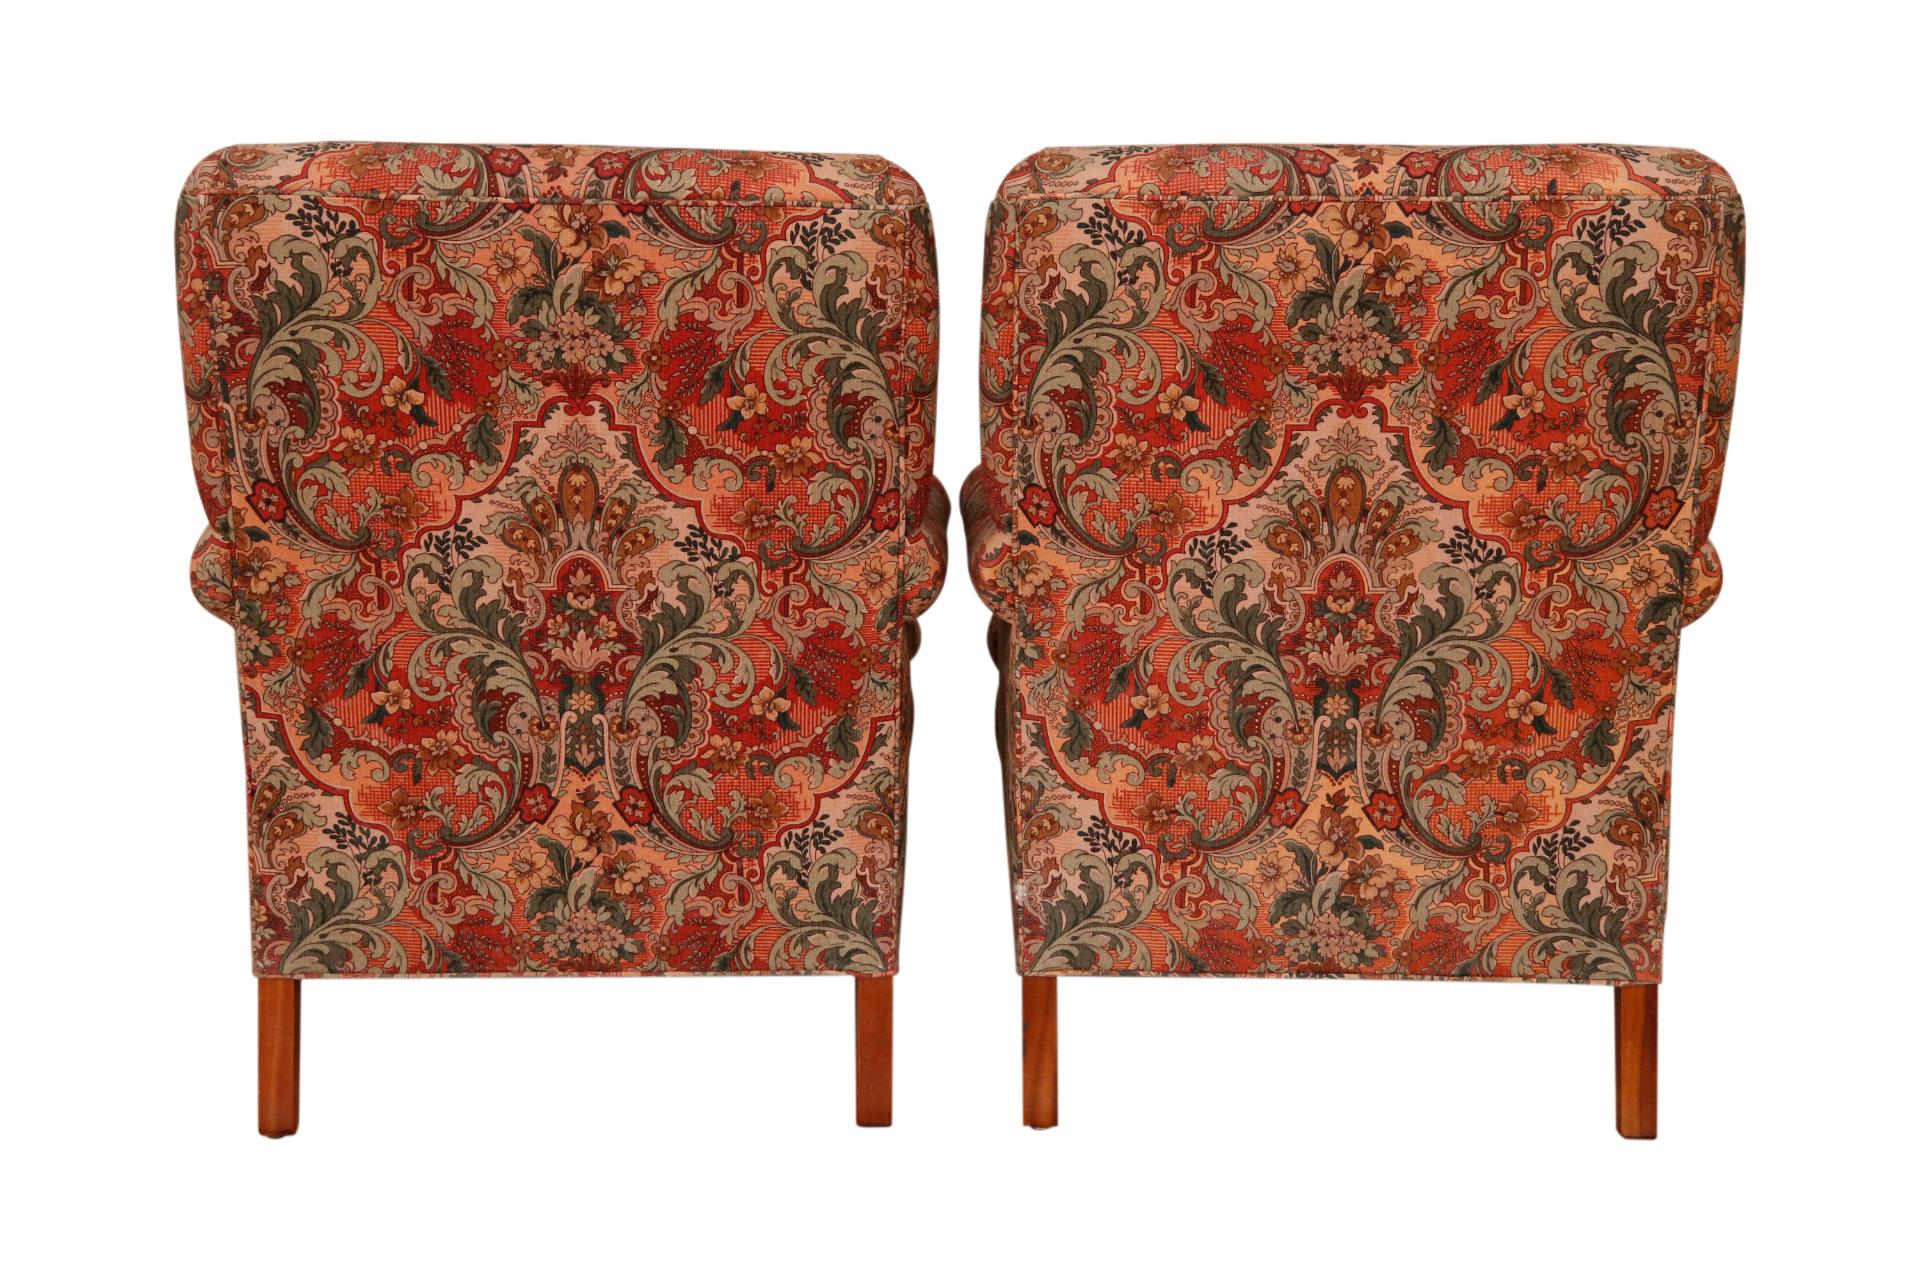 20th Century Pair of Floral English Style Lounge Chairs